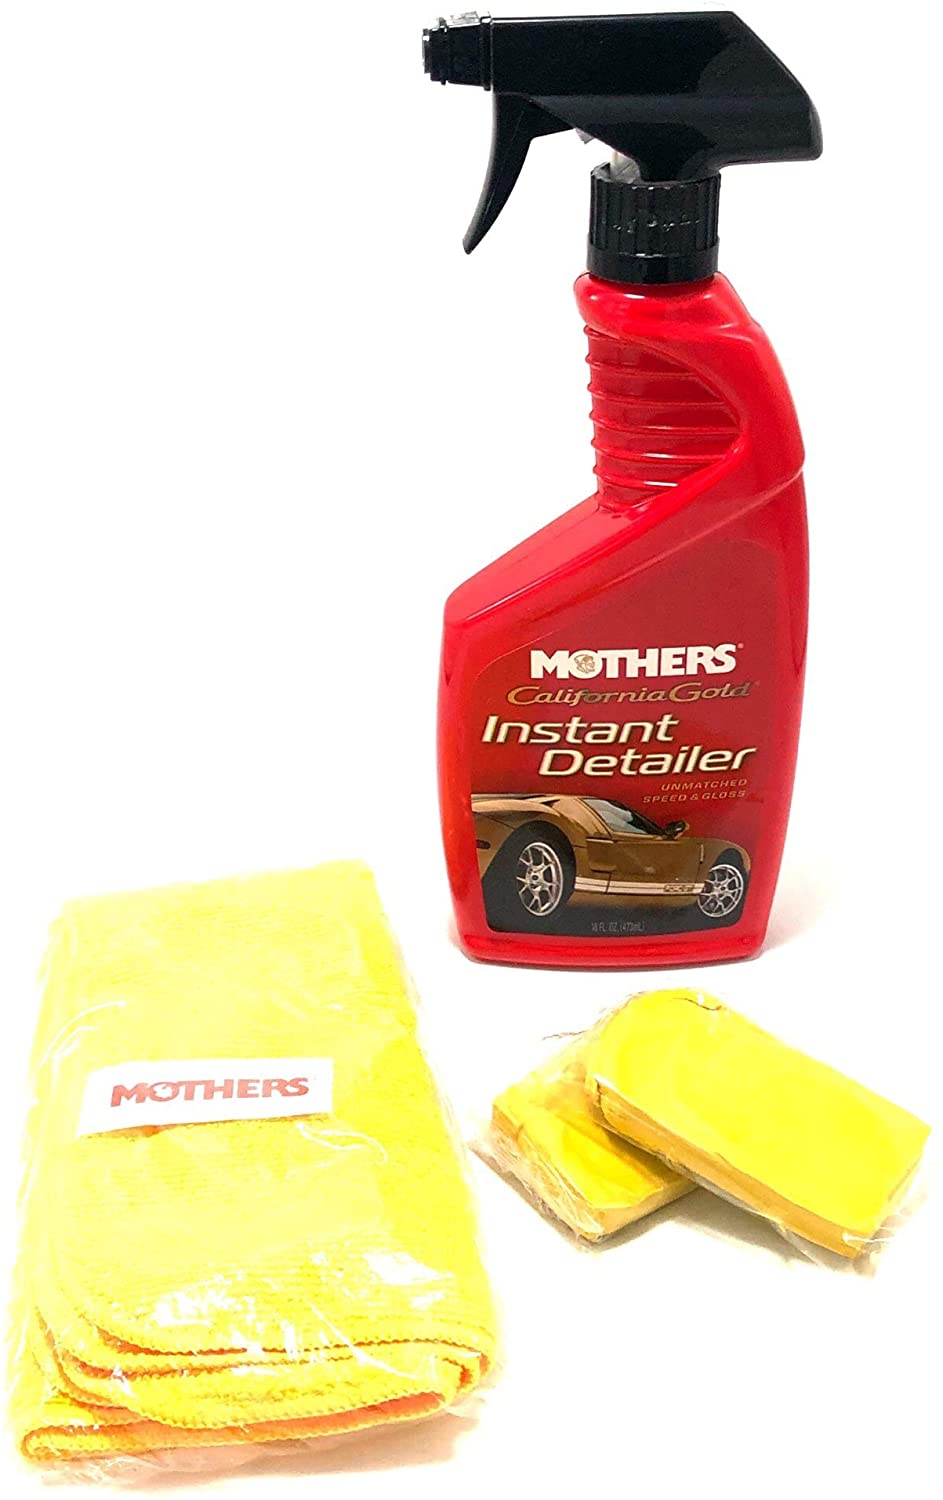  Mothers California Gold Clay Bar System for Car